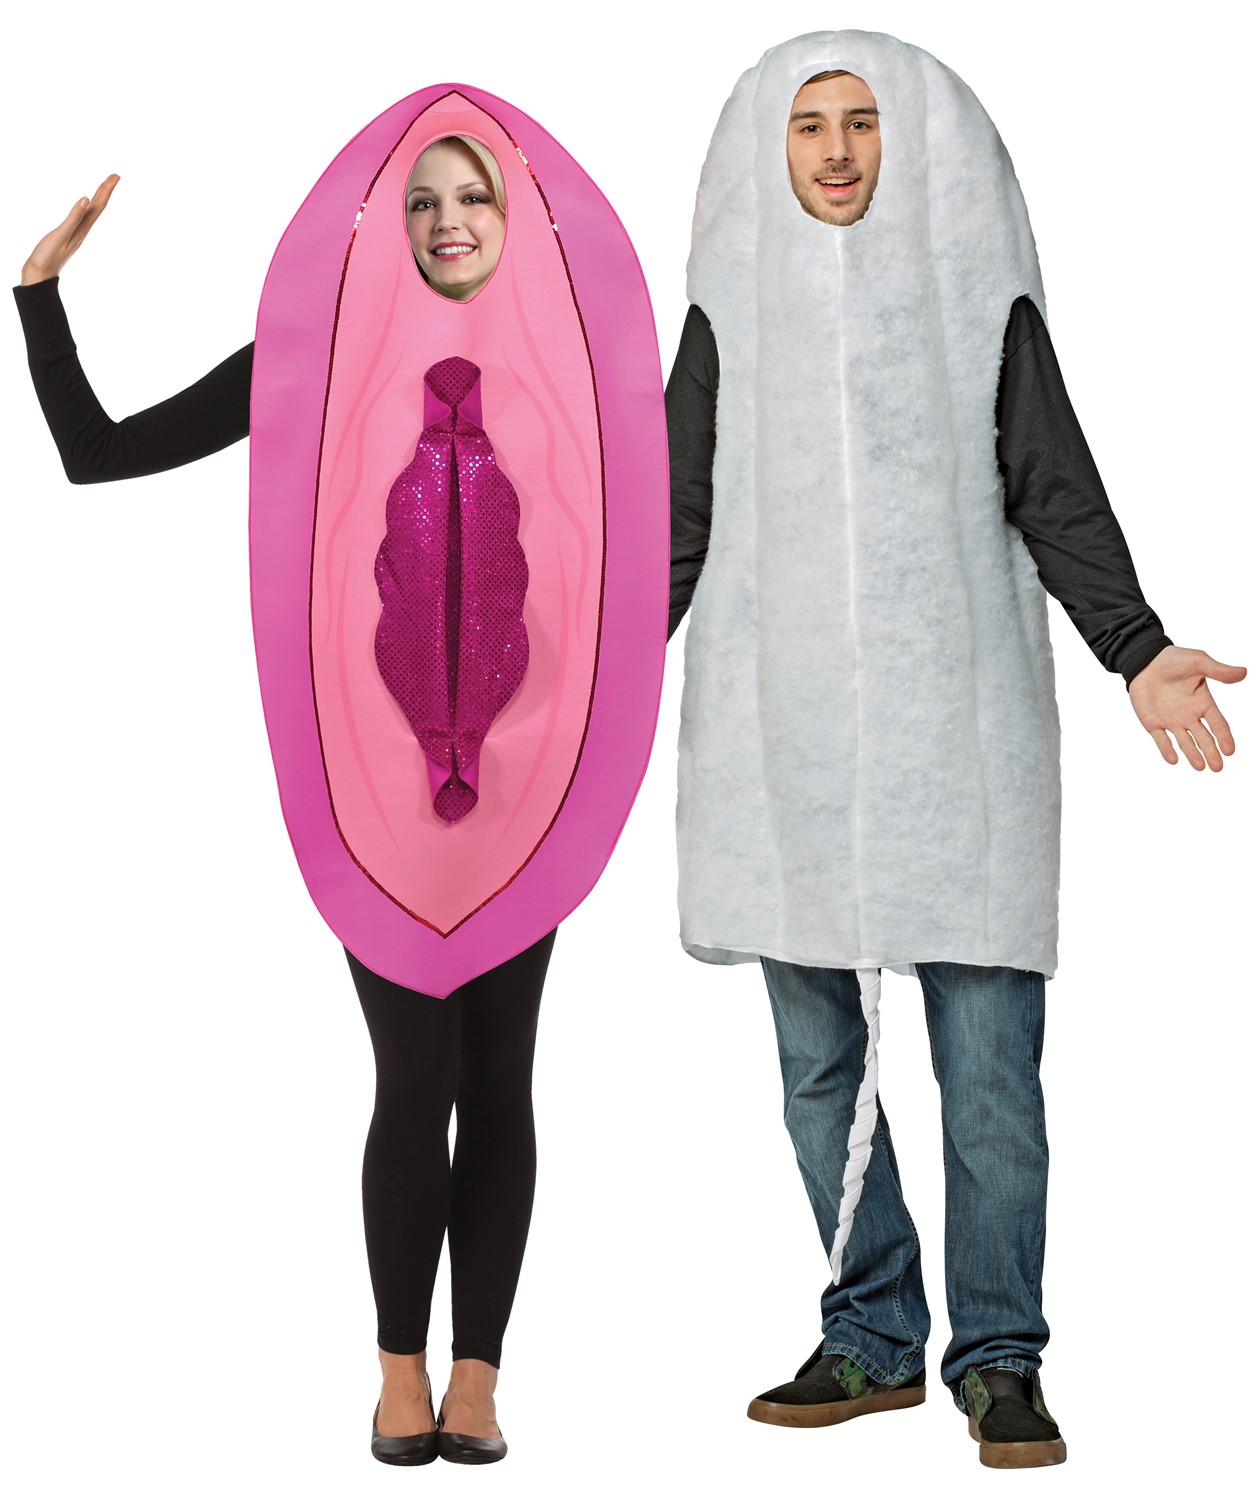 45 Halloween Costume Ideas for College Parties